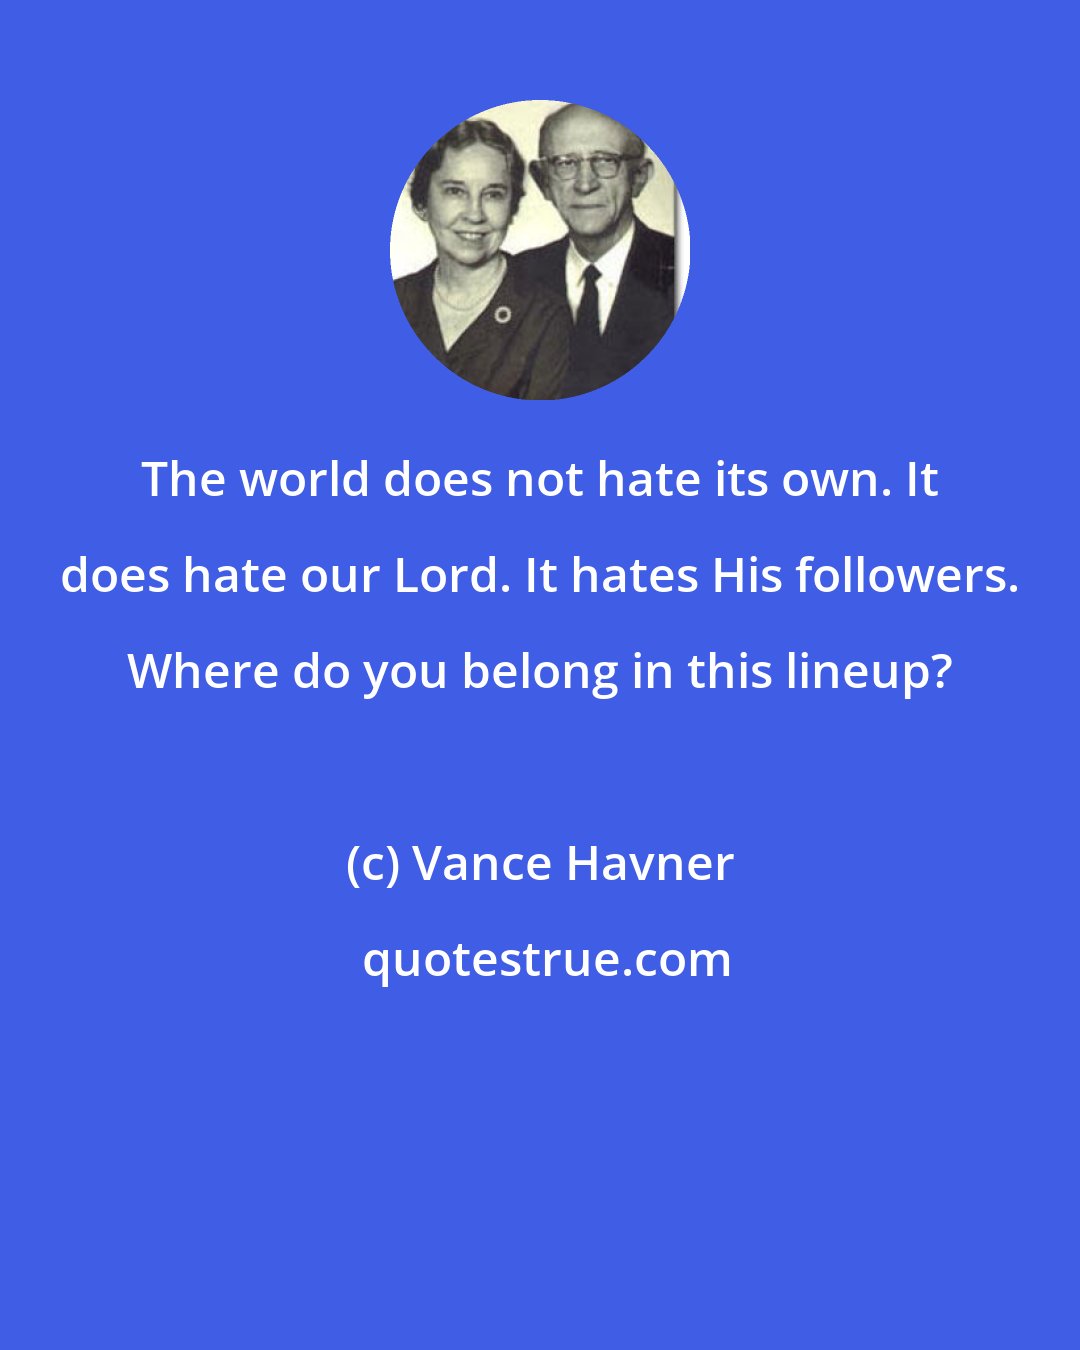 Vance Havner: The world does not hate its own. It does hate our Lord. It hates His followers. Where do you belong in this lineup?